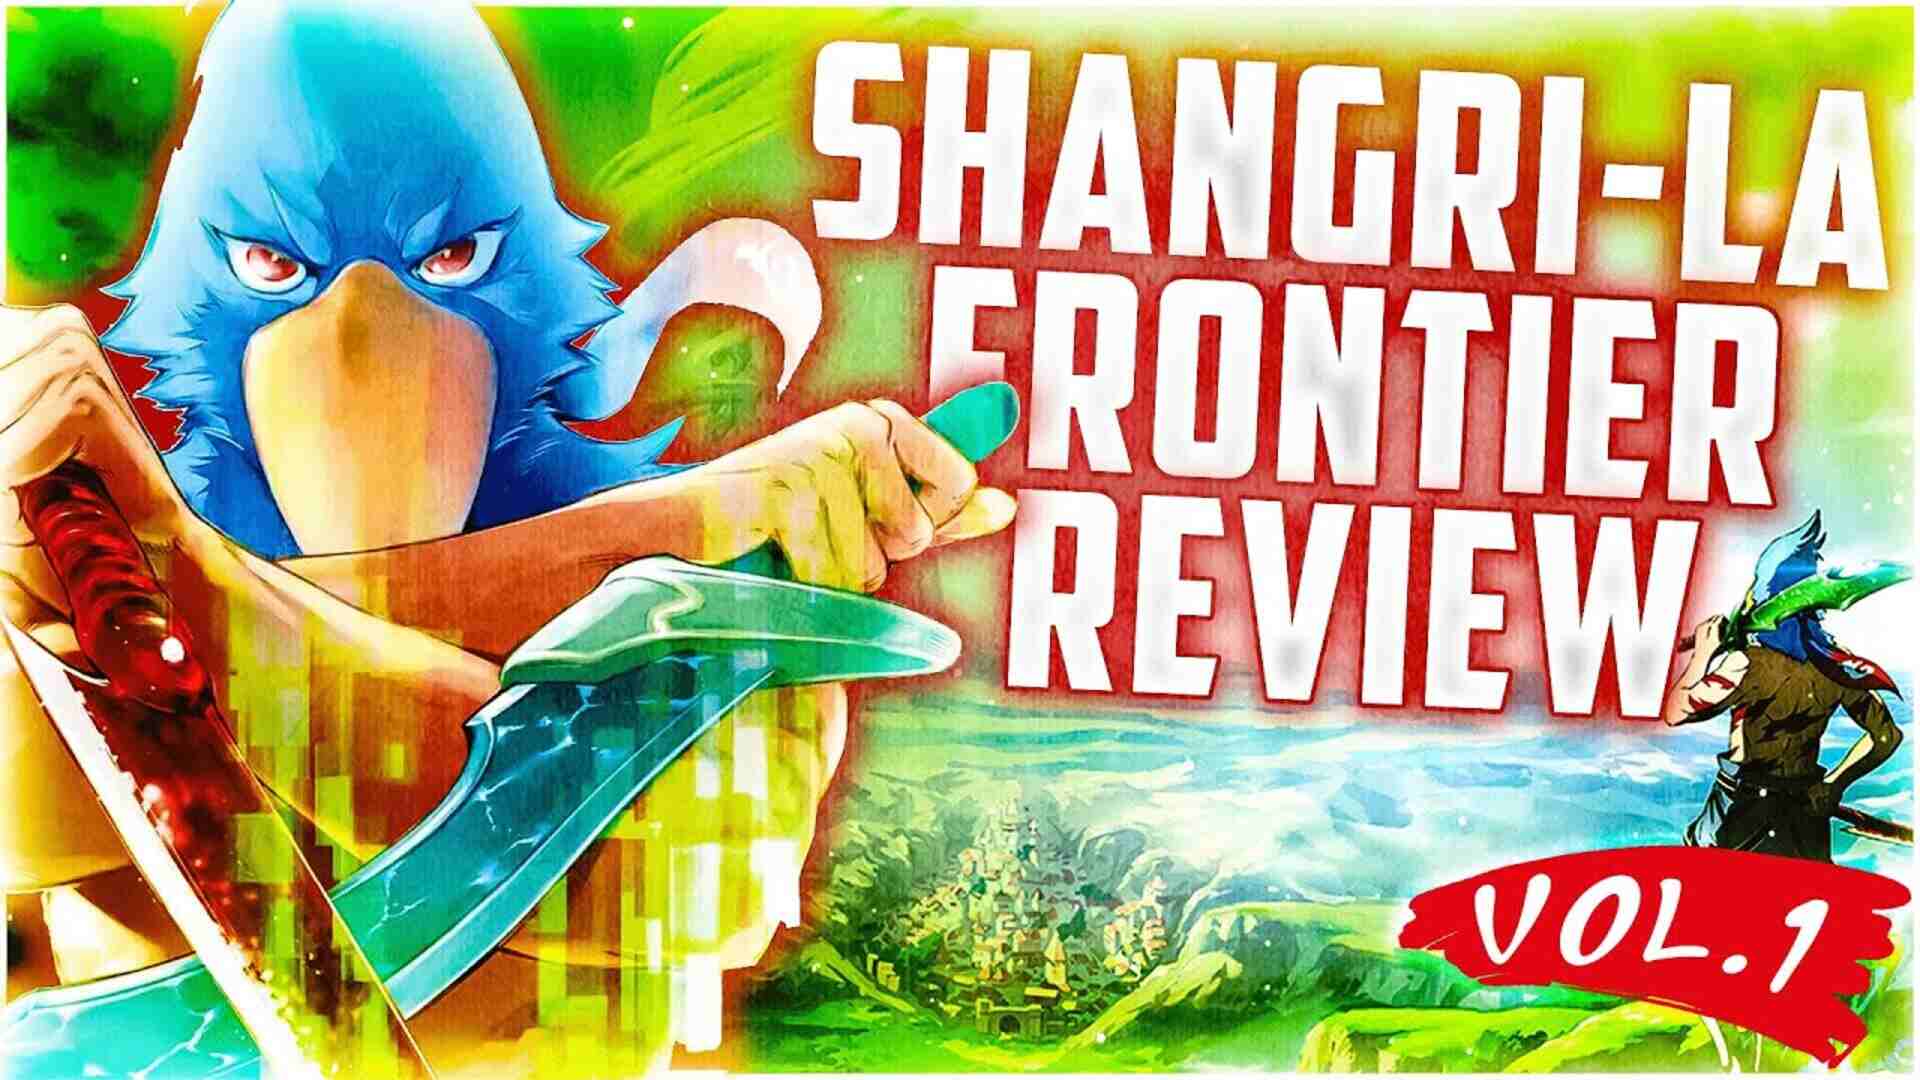 Shangri-La Frontier: Release date, plot, cast and more about the